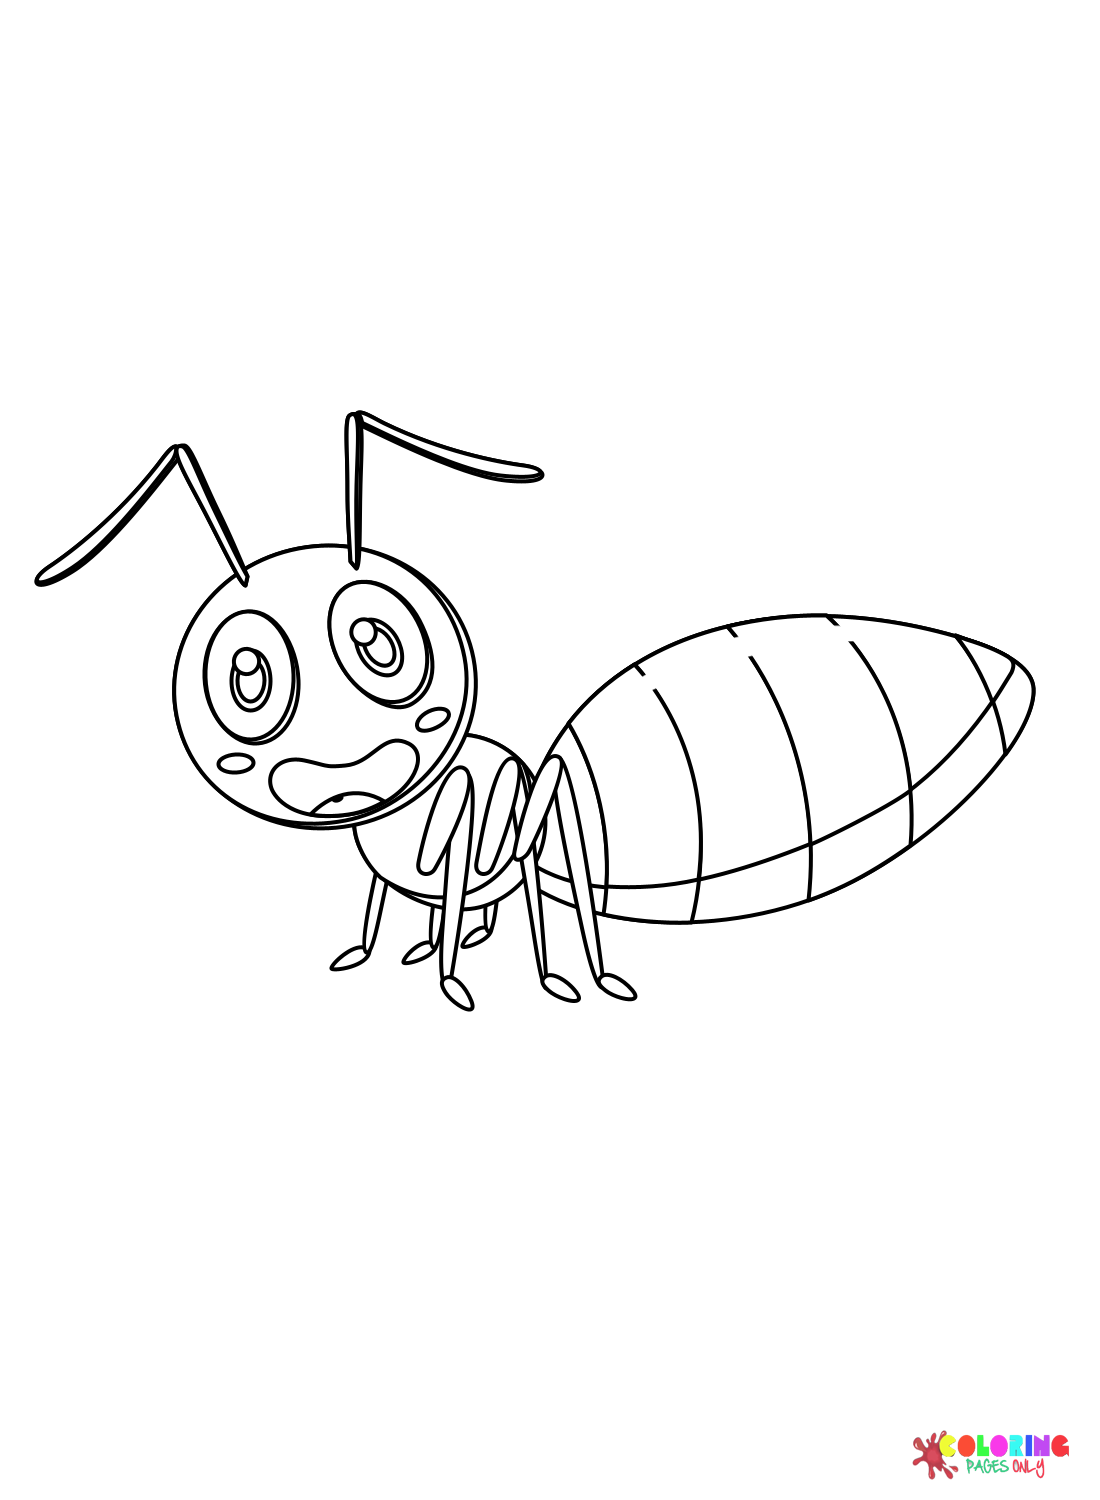 Panic Ant Coloring Page